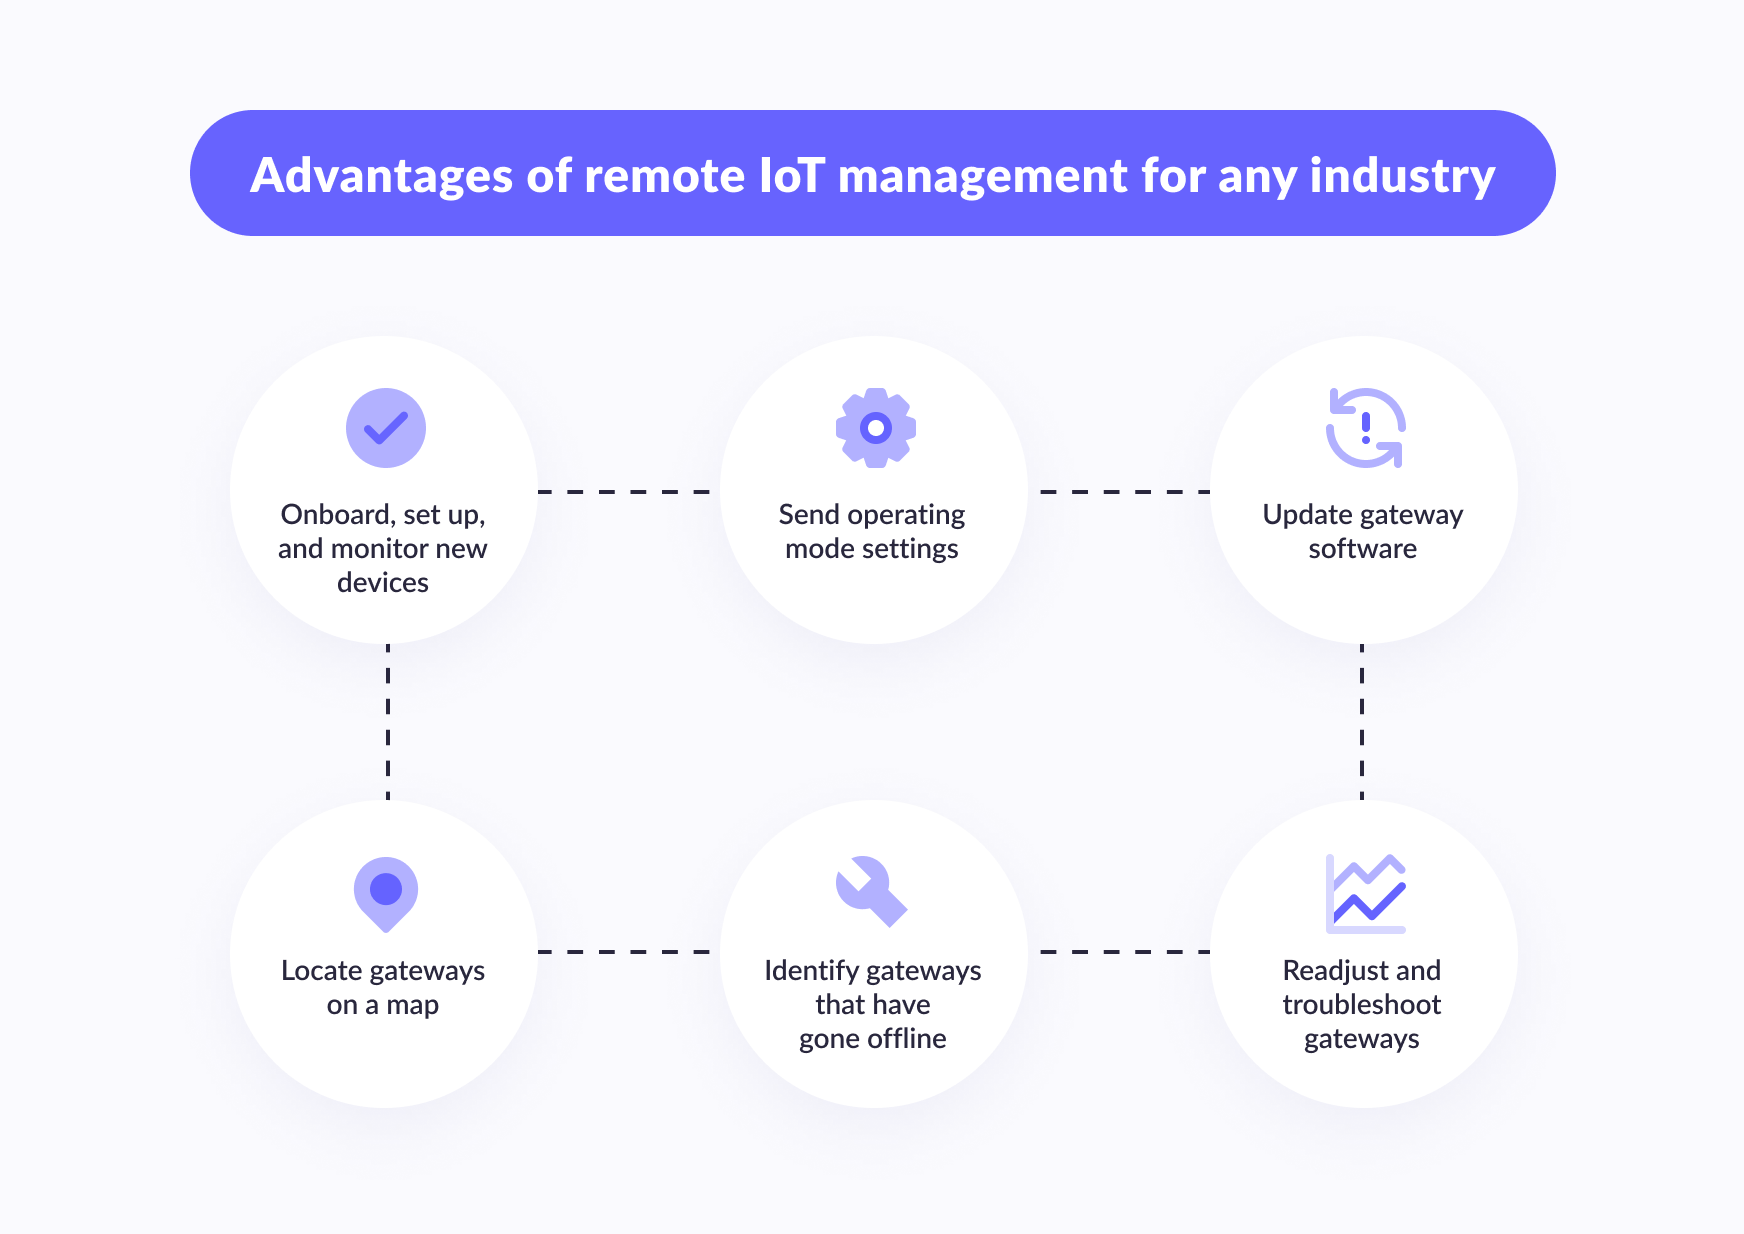 Advantages of remote IoT management for any industry